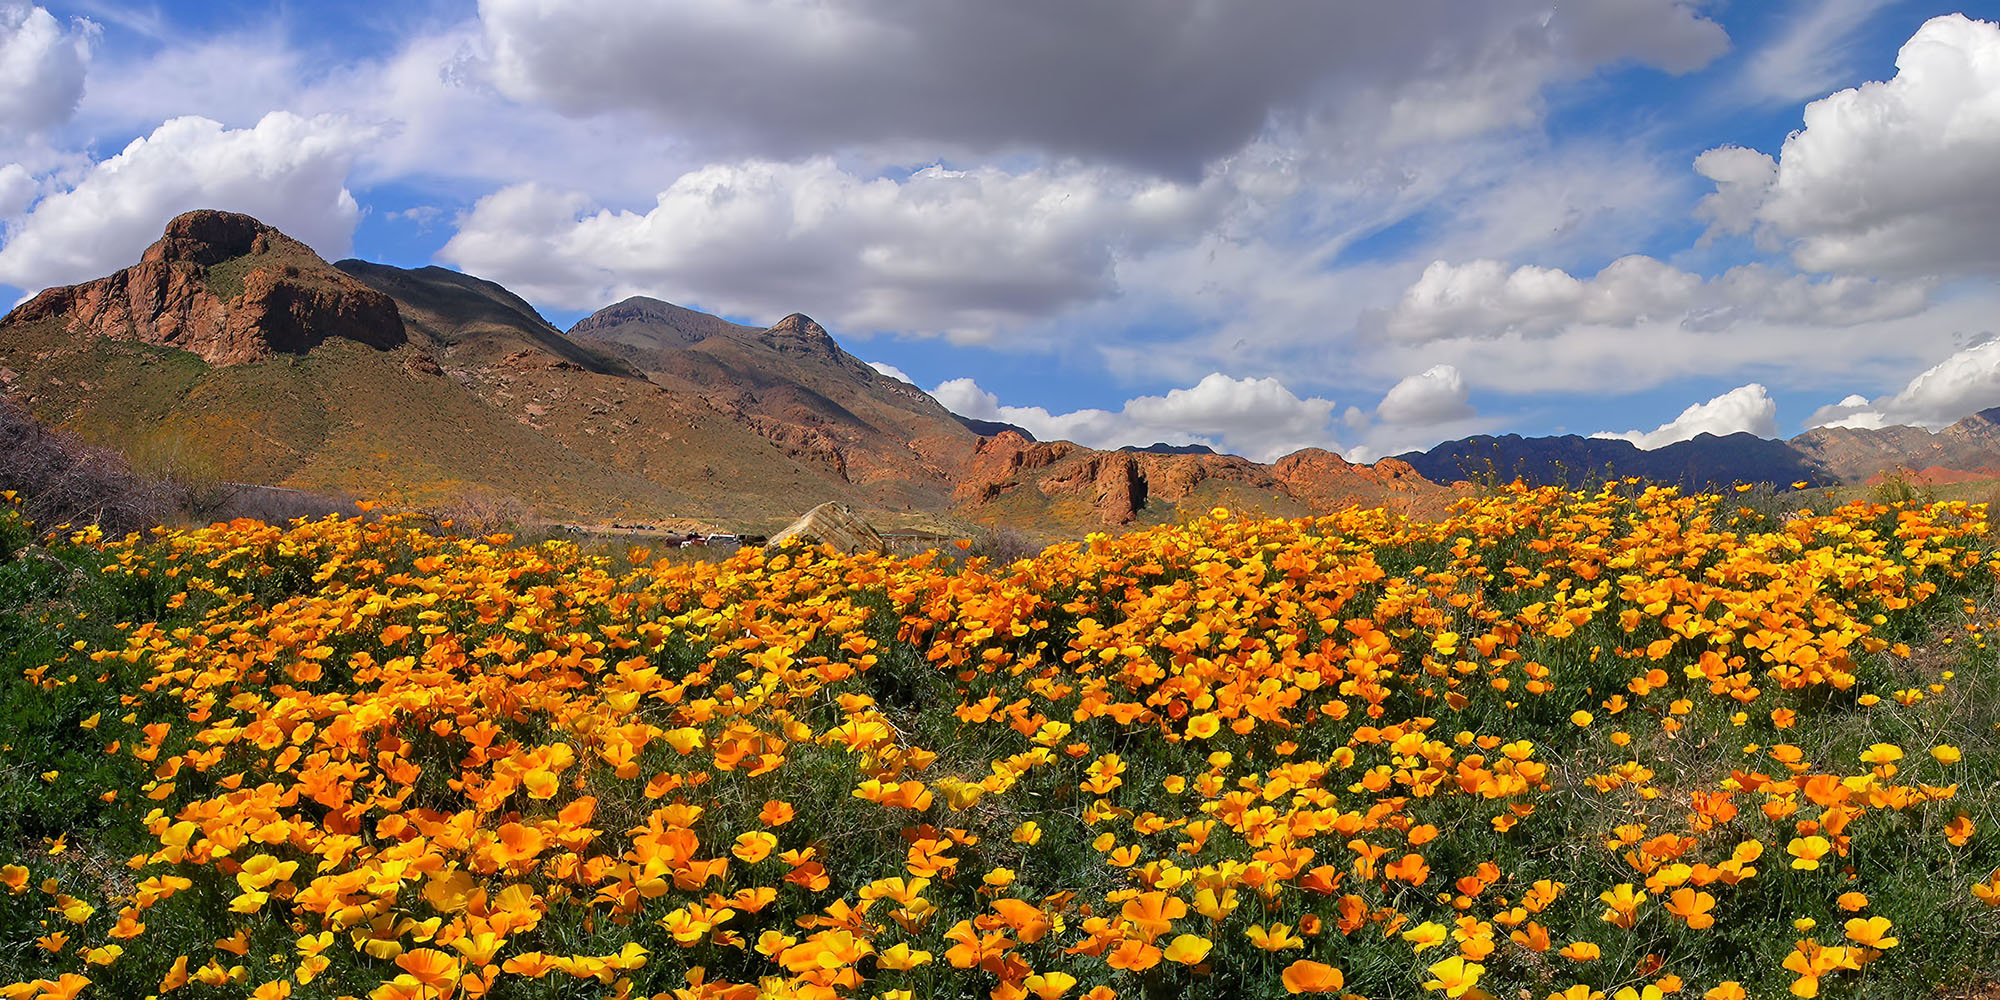 The top third of the photo has clouds and a blue sky. To the left of the frame, halfway down, are mountains. In the bottom third is a field of golden Mexican poppies in bloom. 